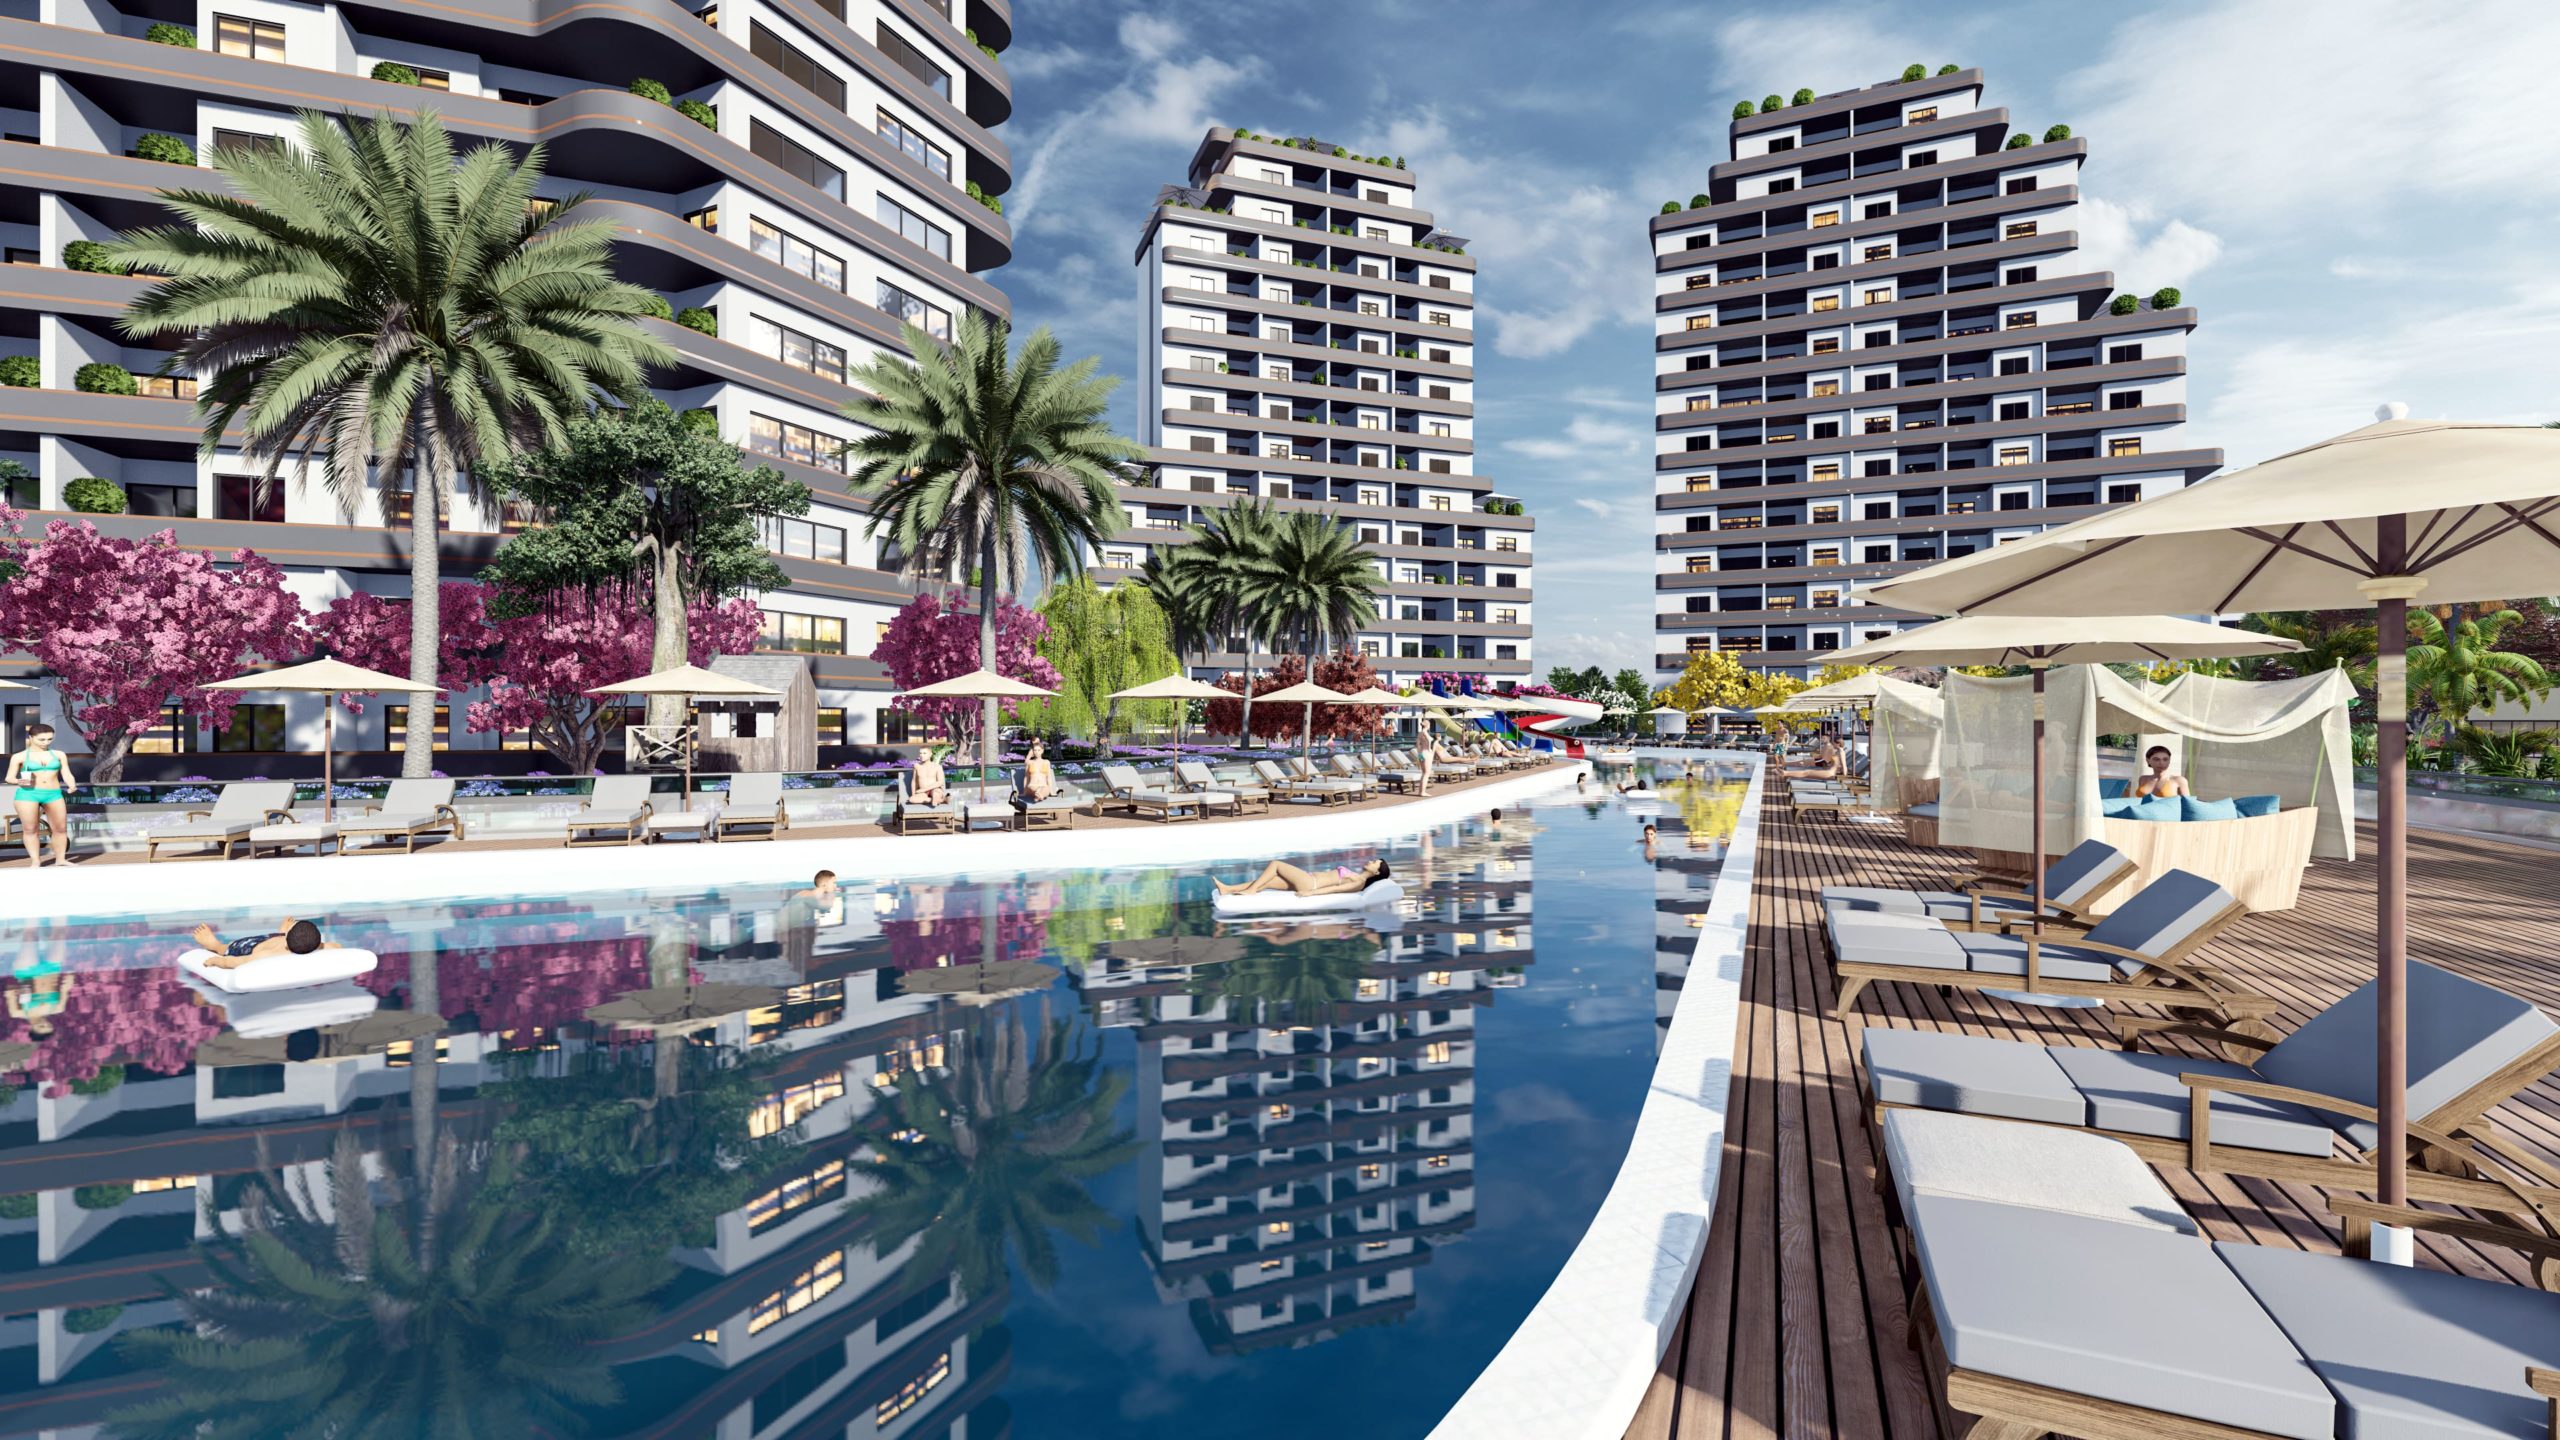 A new modern complex in Mersin is under construction